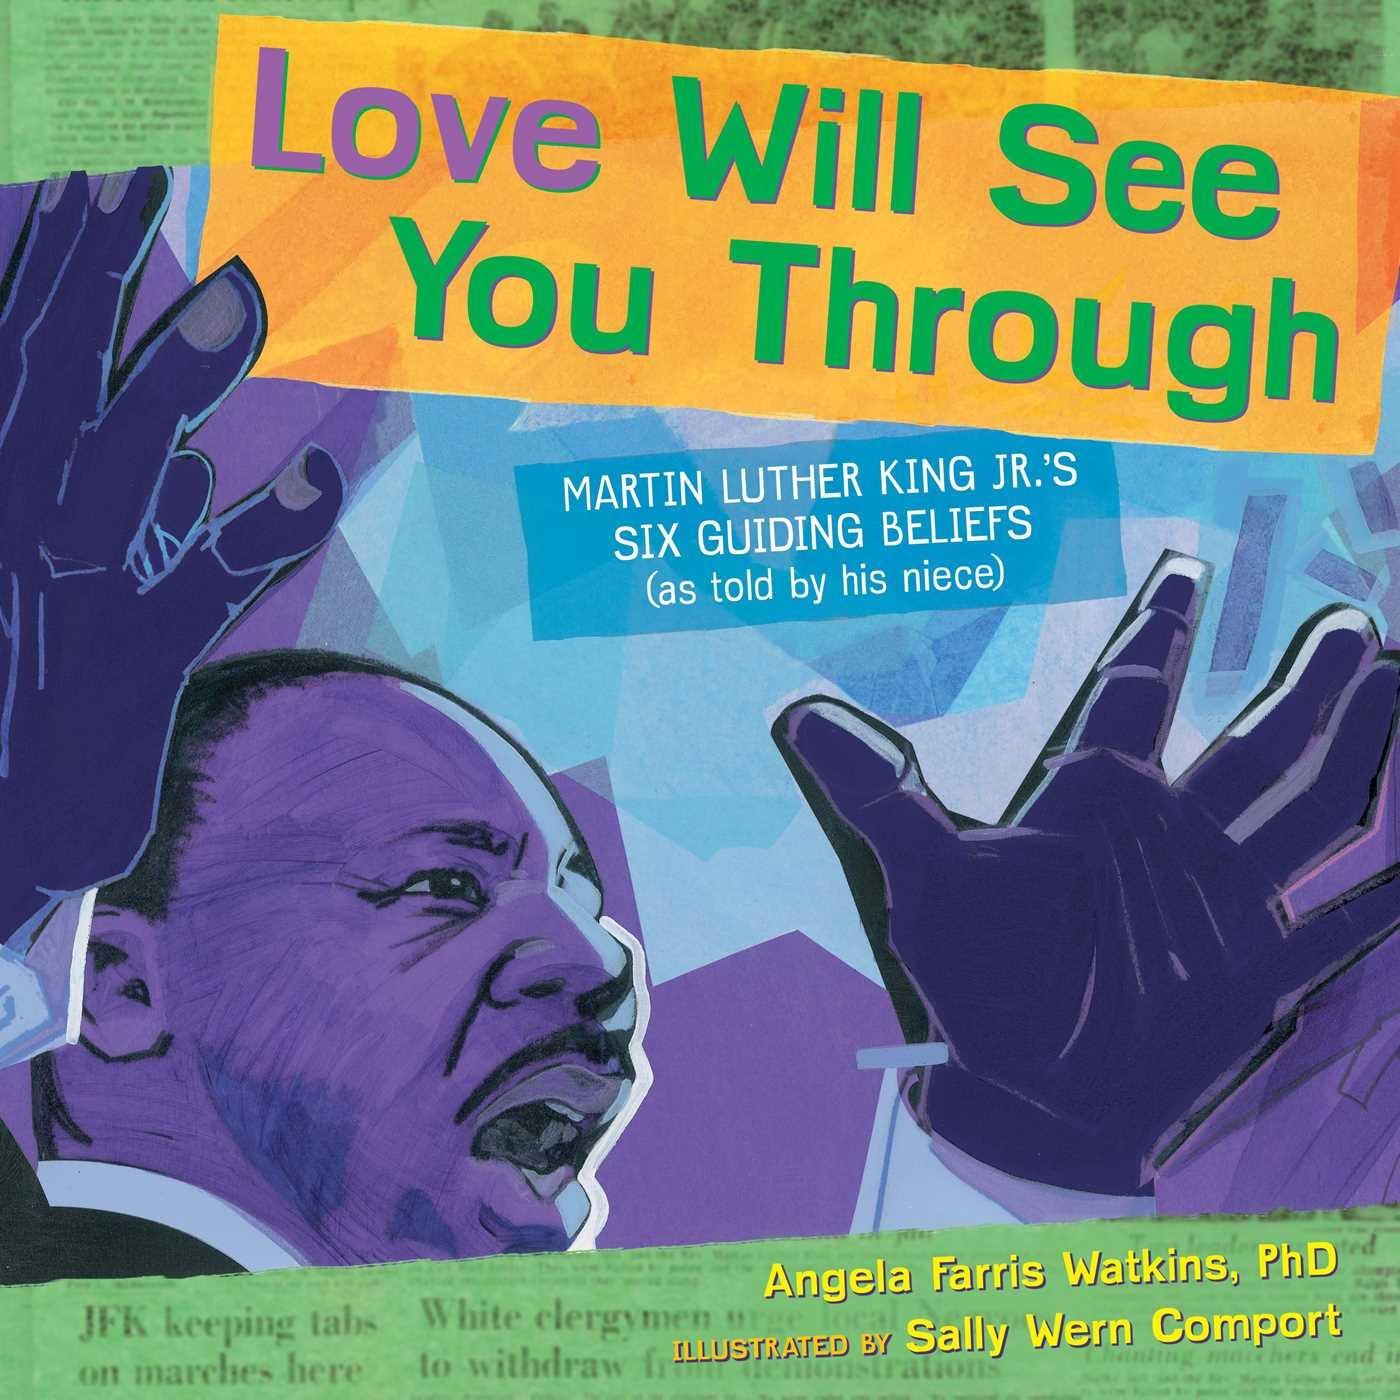 Love Will See You Through: Martin Luther King Jr.'s Six Guiding Beliefs (as told by his niece)  by Angela Farris Watkins